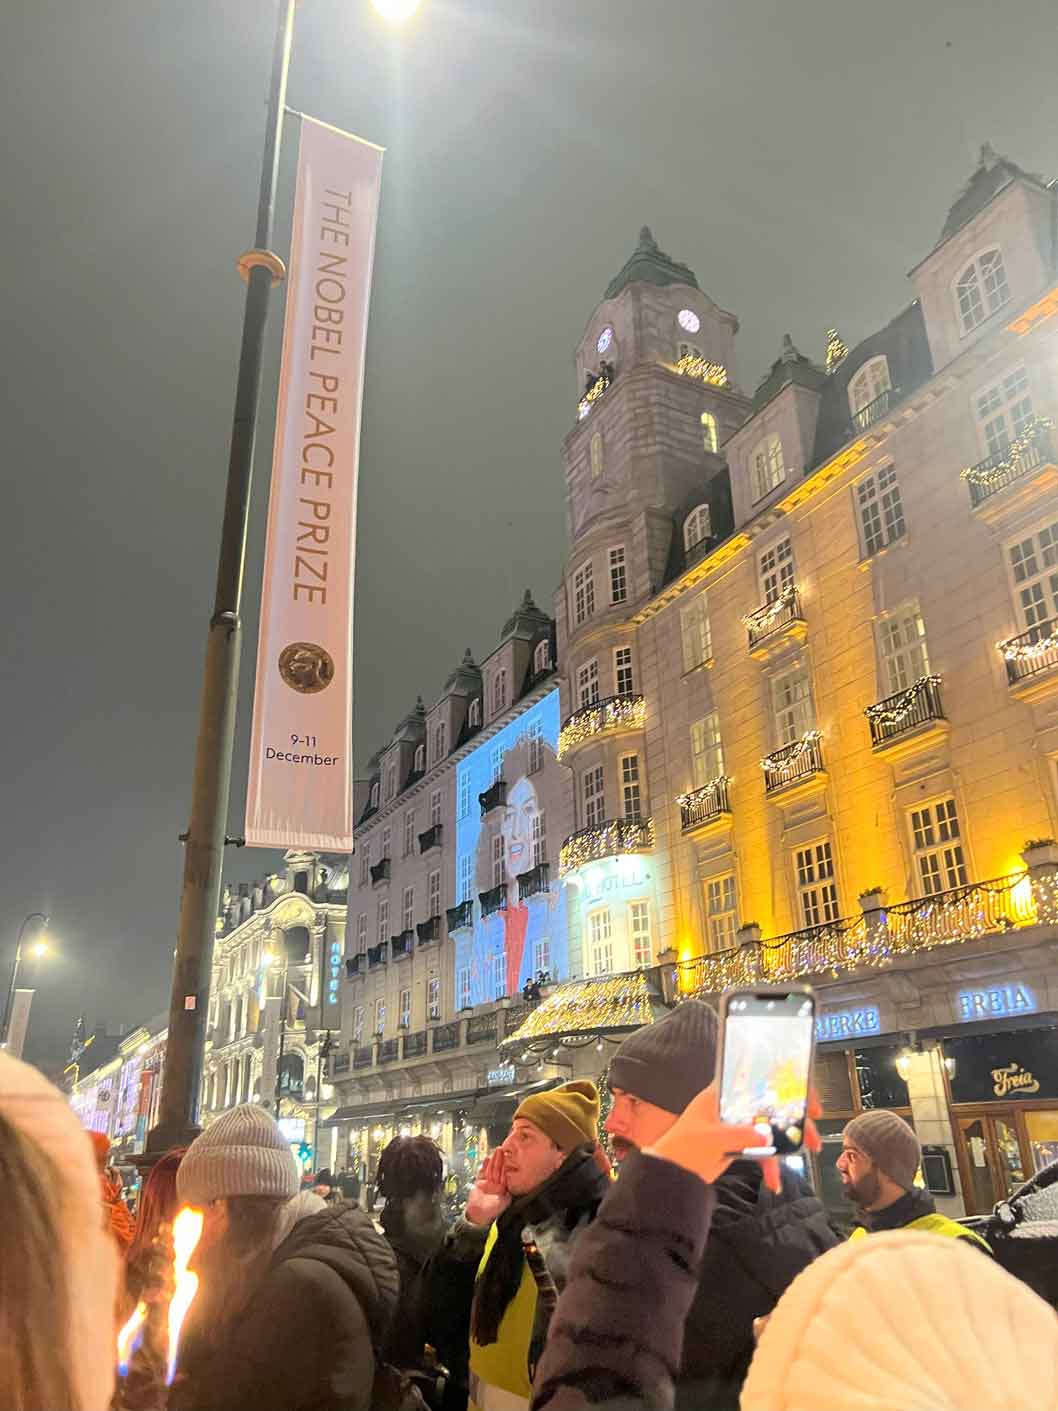 Outside crowd with a pole for THE NOBEL PEACE PRIZE 9-11 DECEMBER